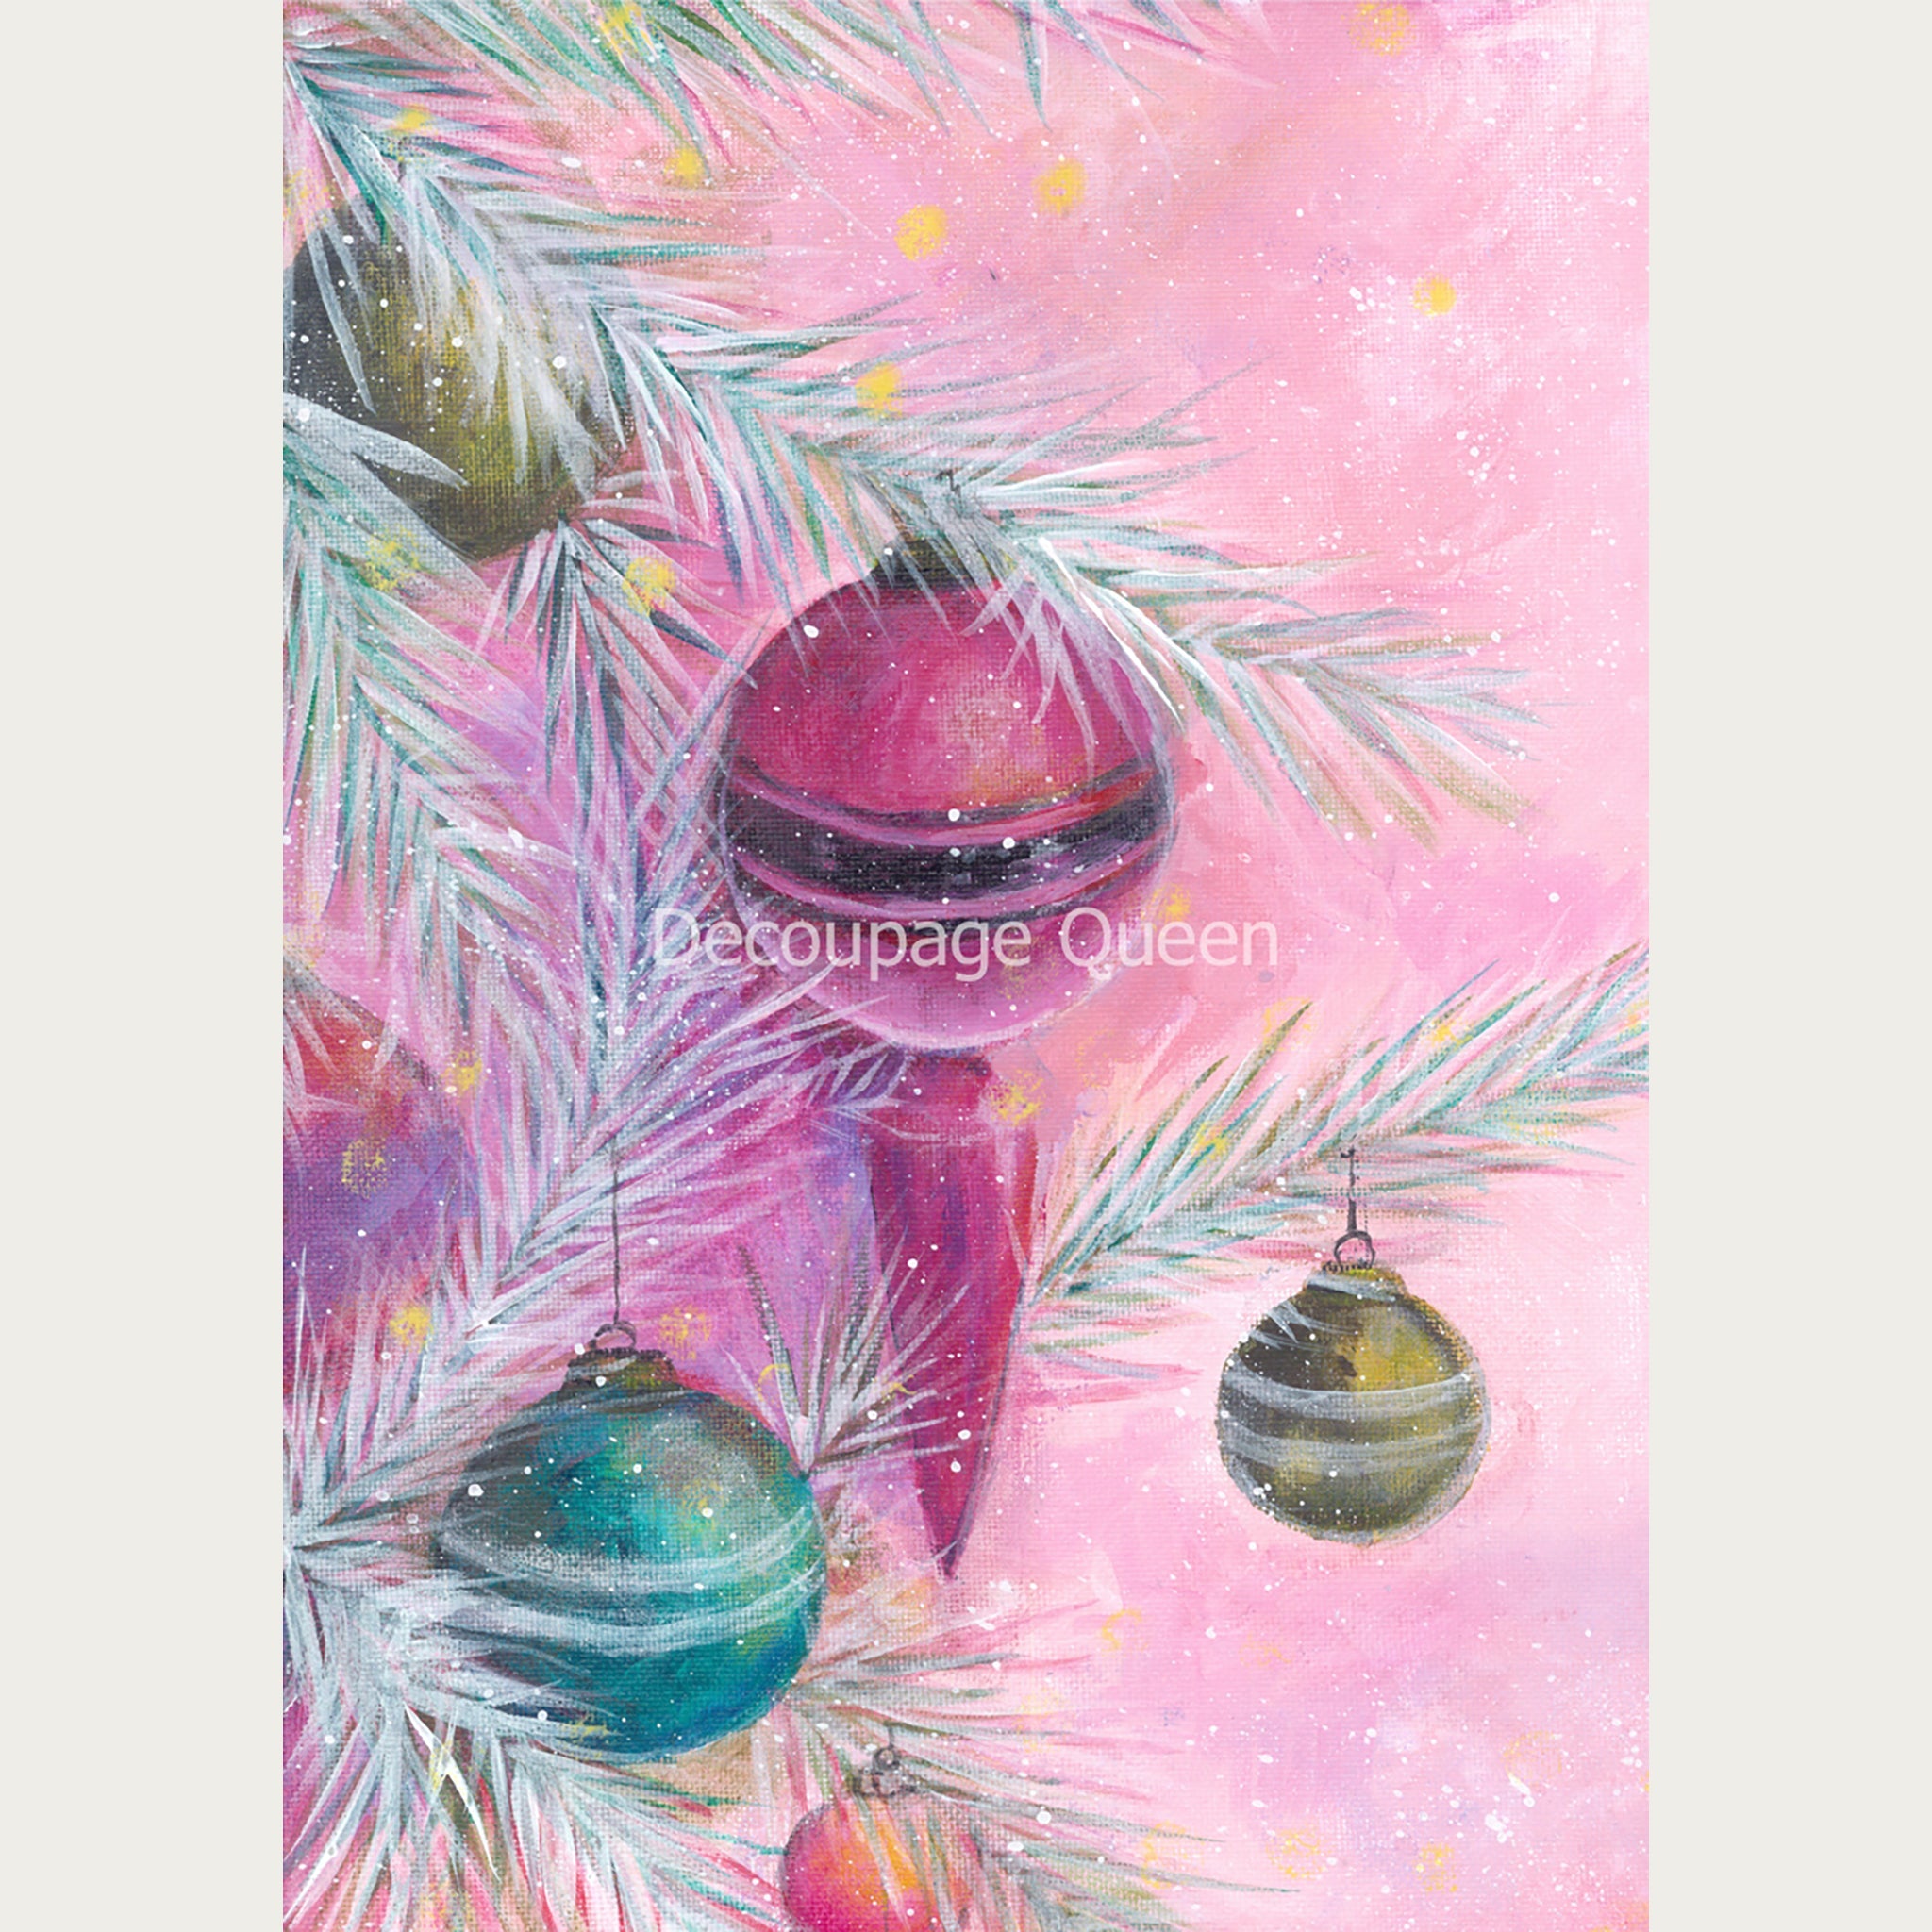 Hand painted style A2 rice paper design of ornaments and on a pine branch on a soft pink background. White borders are on the sides.